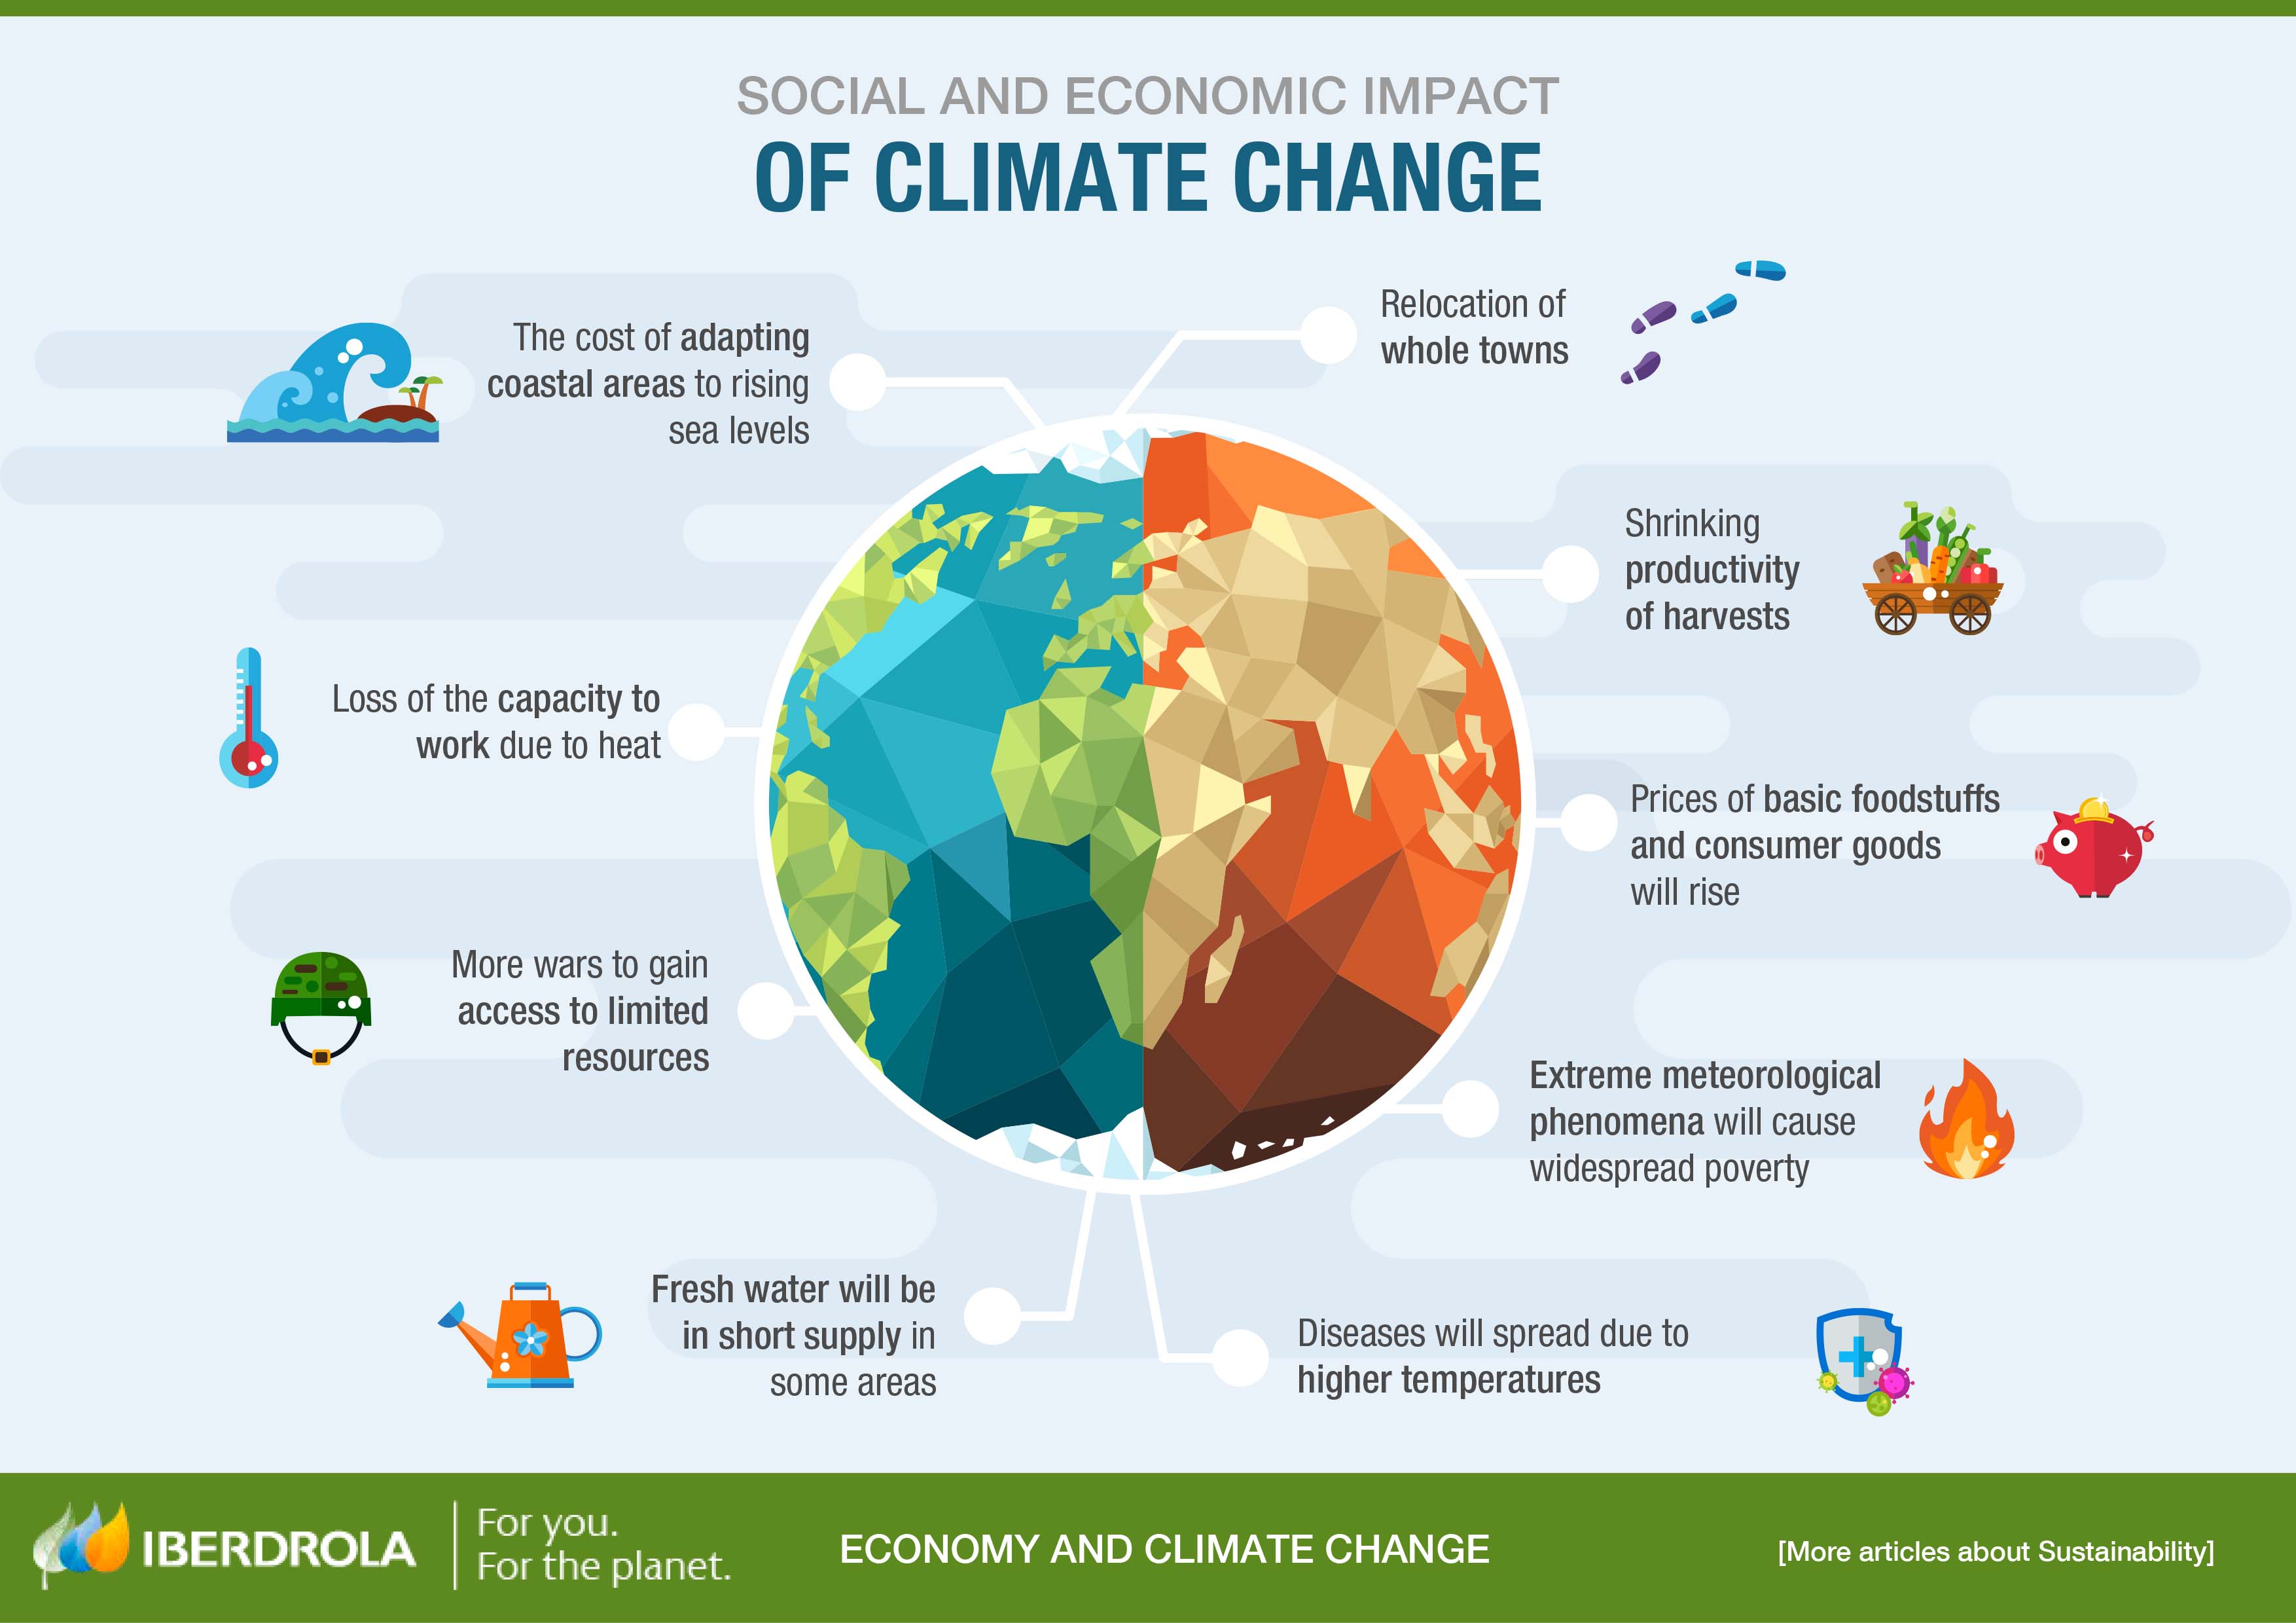 The social and economic impact of climate change.